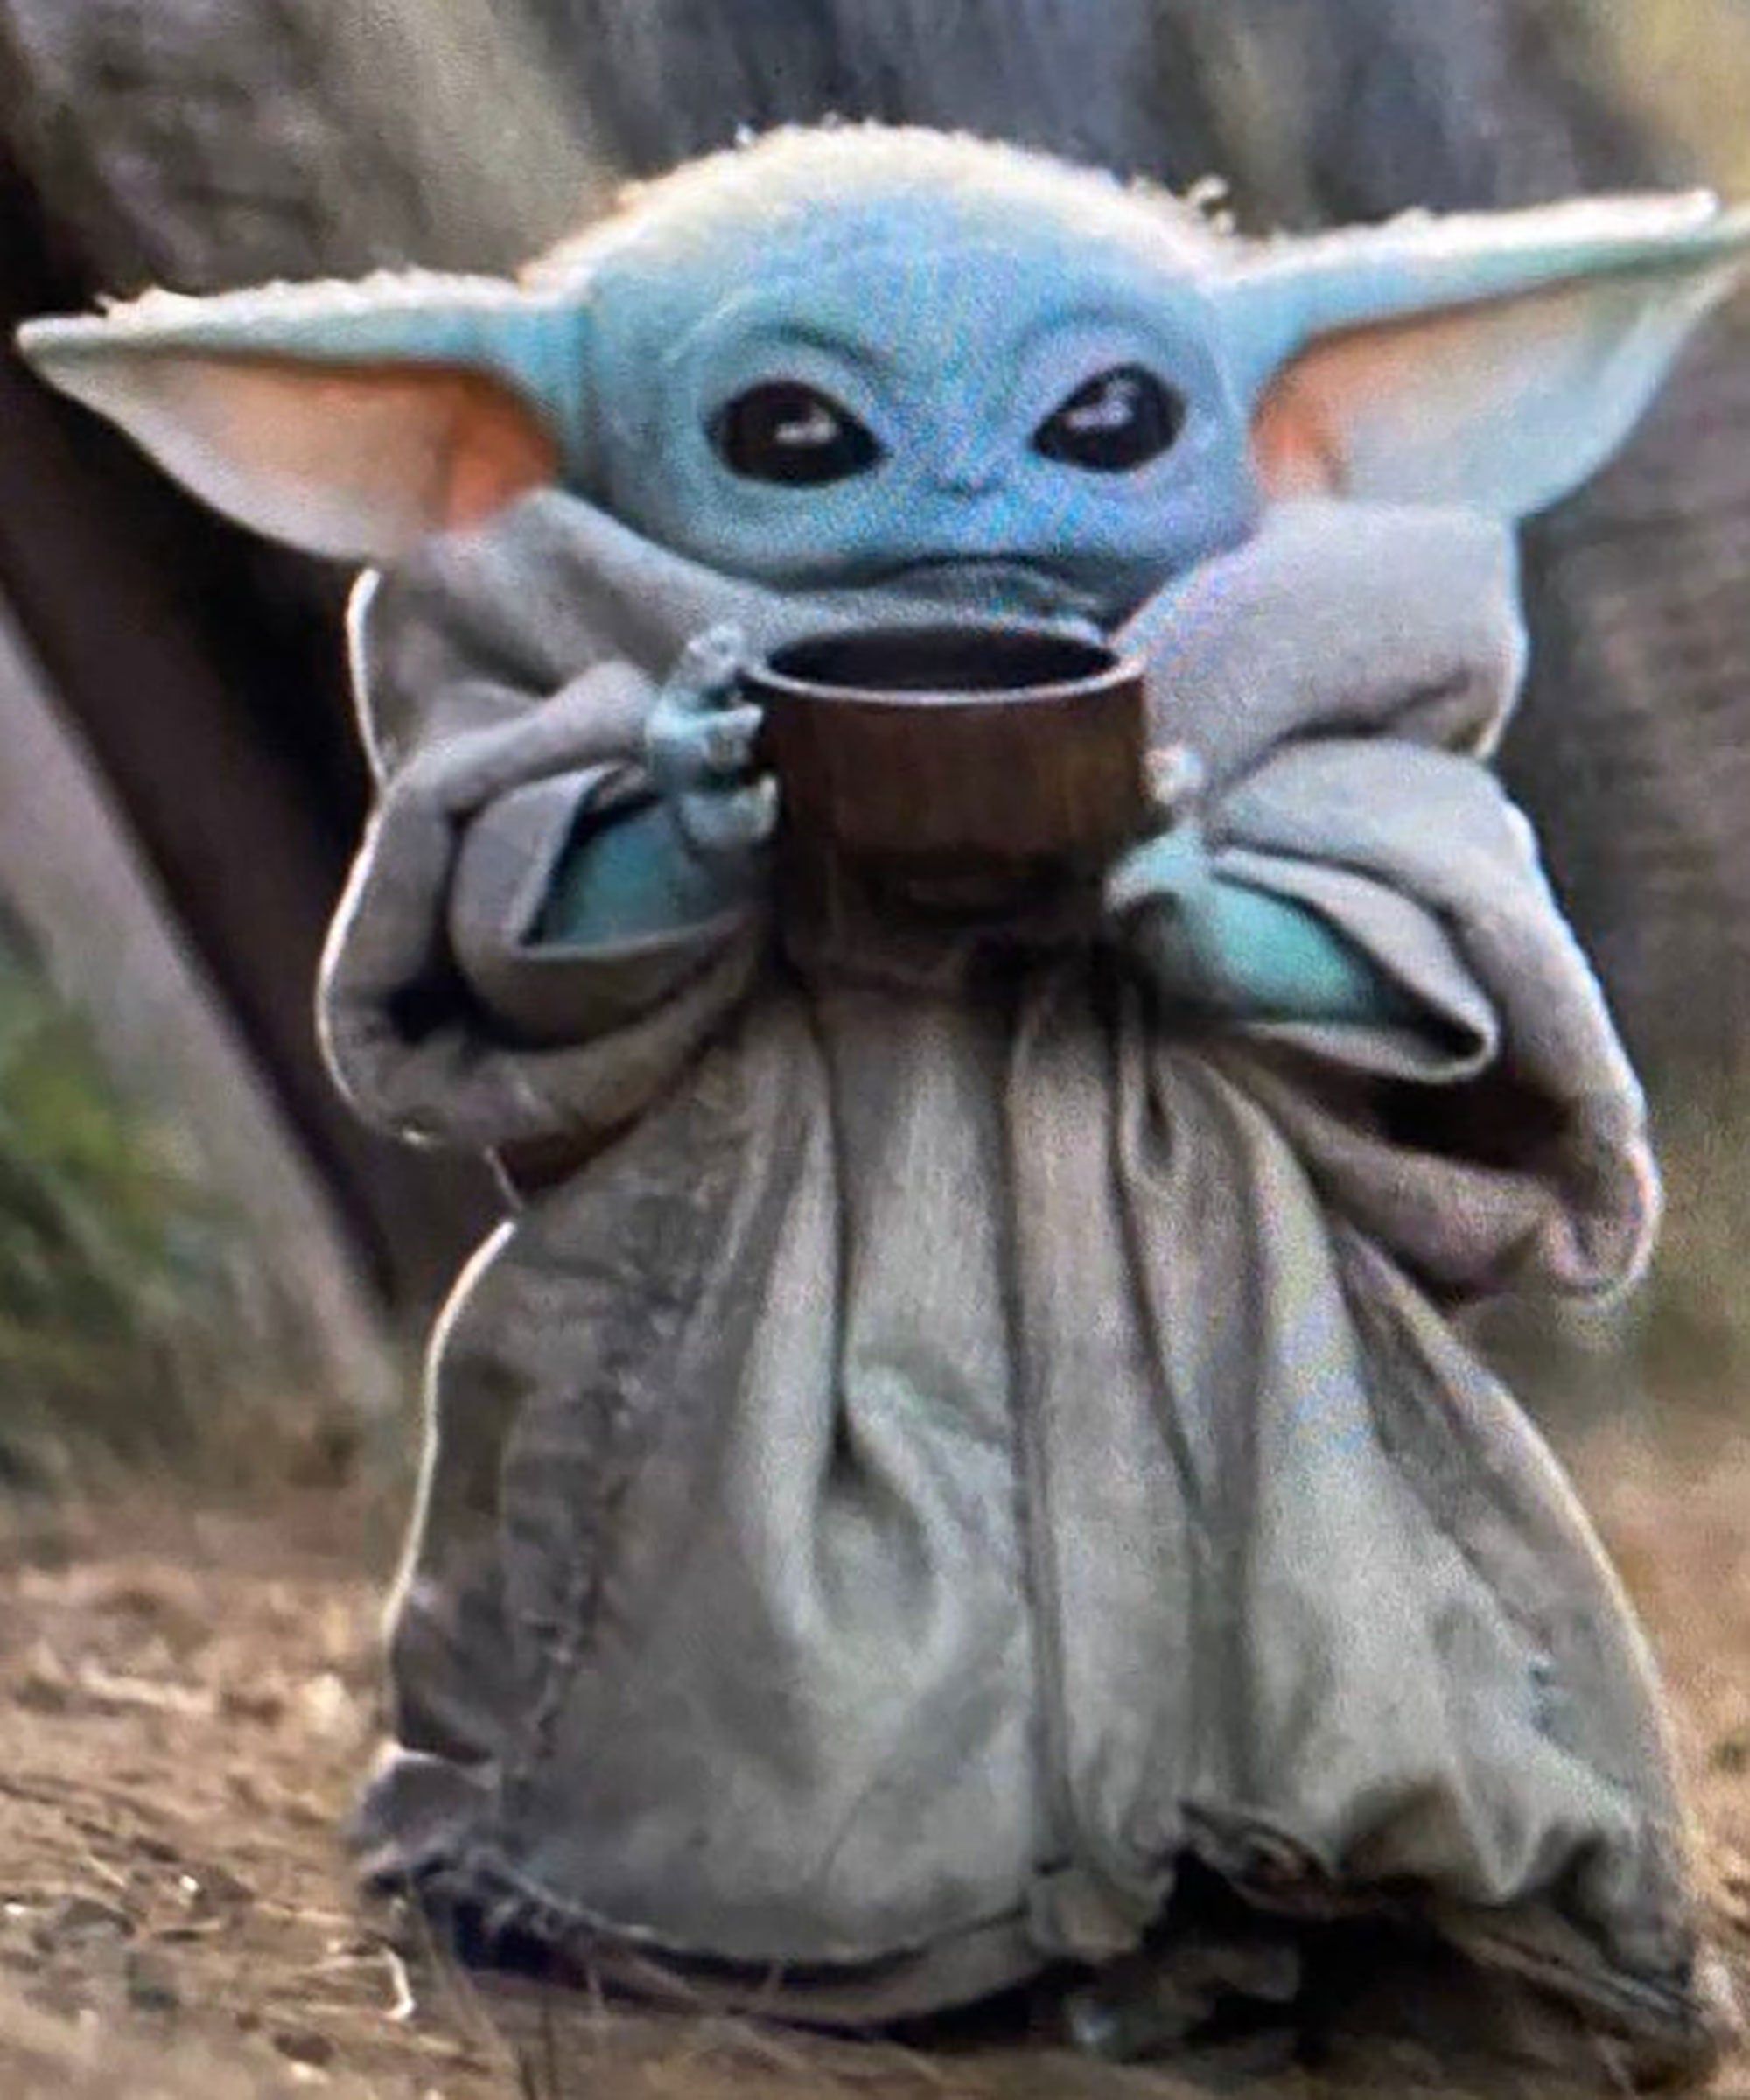 Free Download Baby Yoda Soup Wallpapers 00x2400 For Your Desktop Mobile Tablet Explore 32 Baby Yoda Hd Wallpapers Baby Yoda Valentine Wallpapers Yoda Wallpaper Hd Hulk Yoda Wallpaper Hd